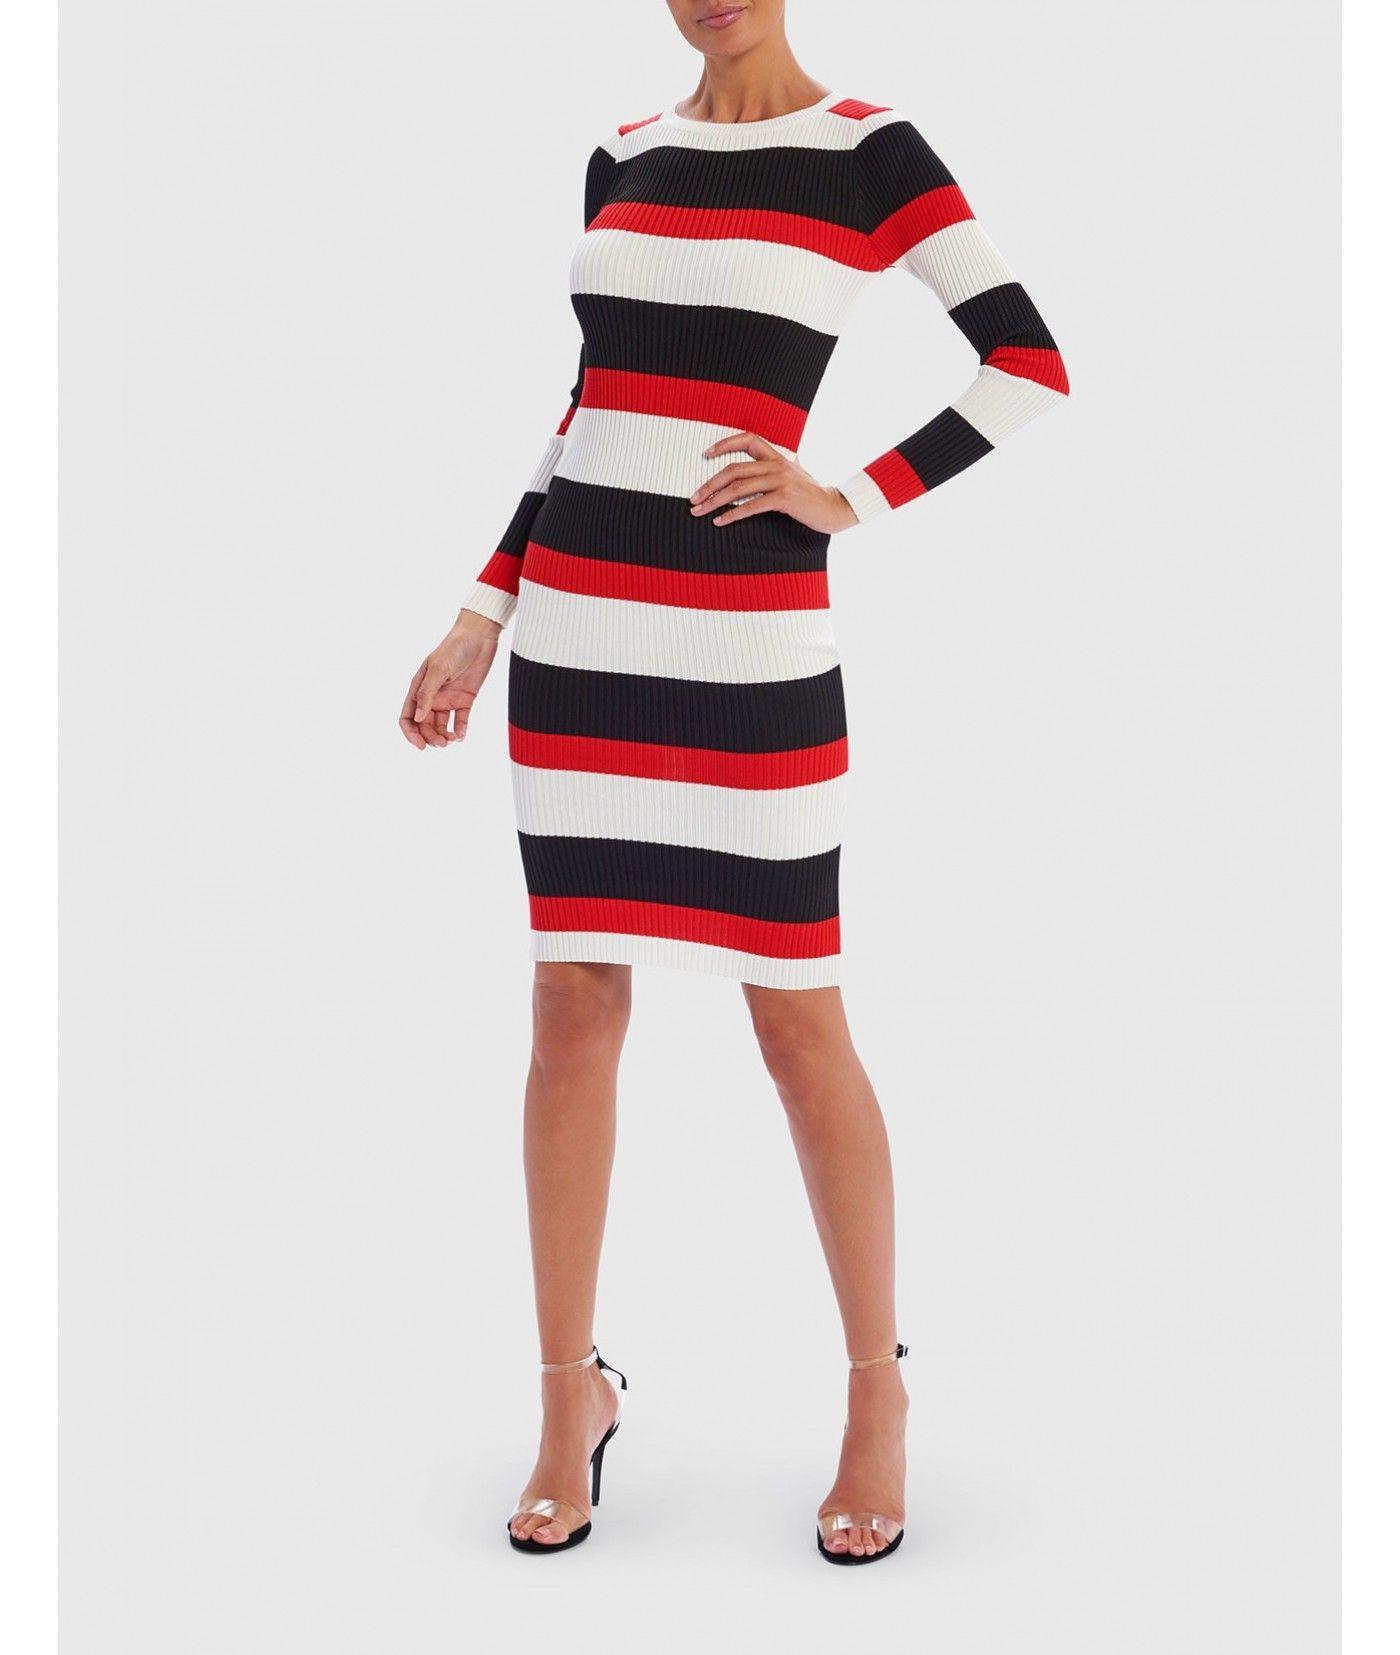 Stripe Red N Logo - Black White and Red Striped Bodycon Dress | Forever Unique